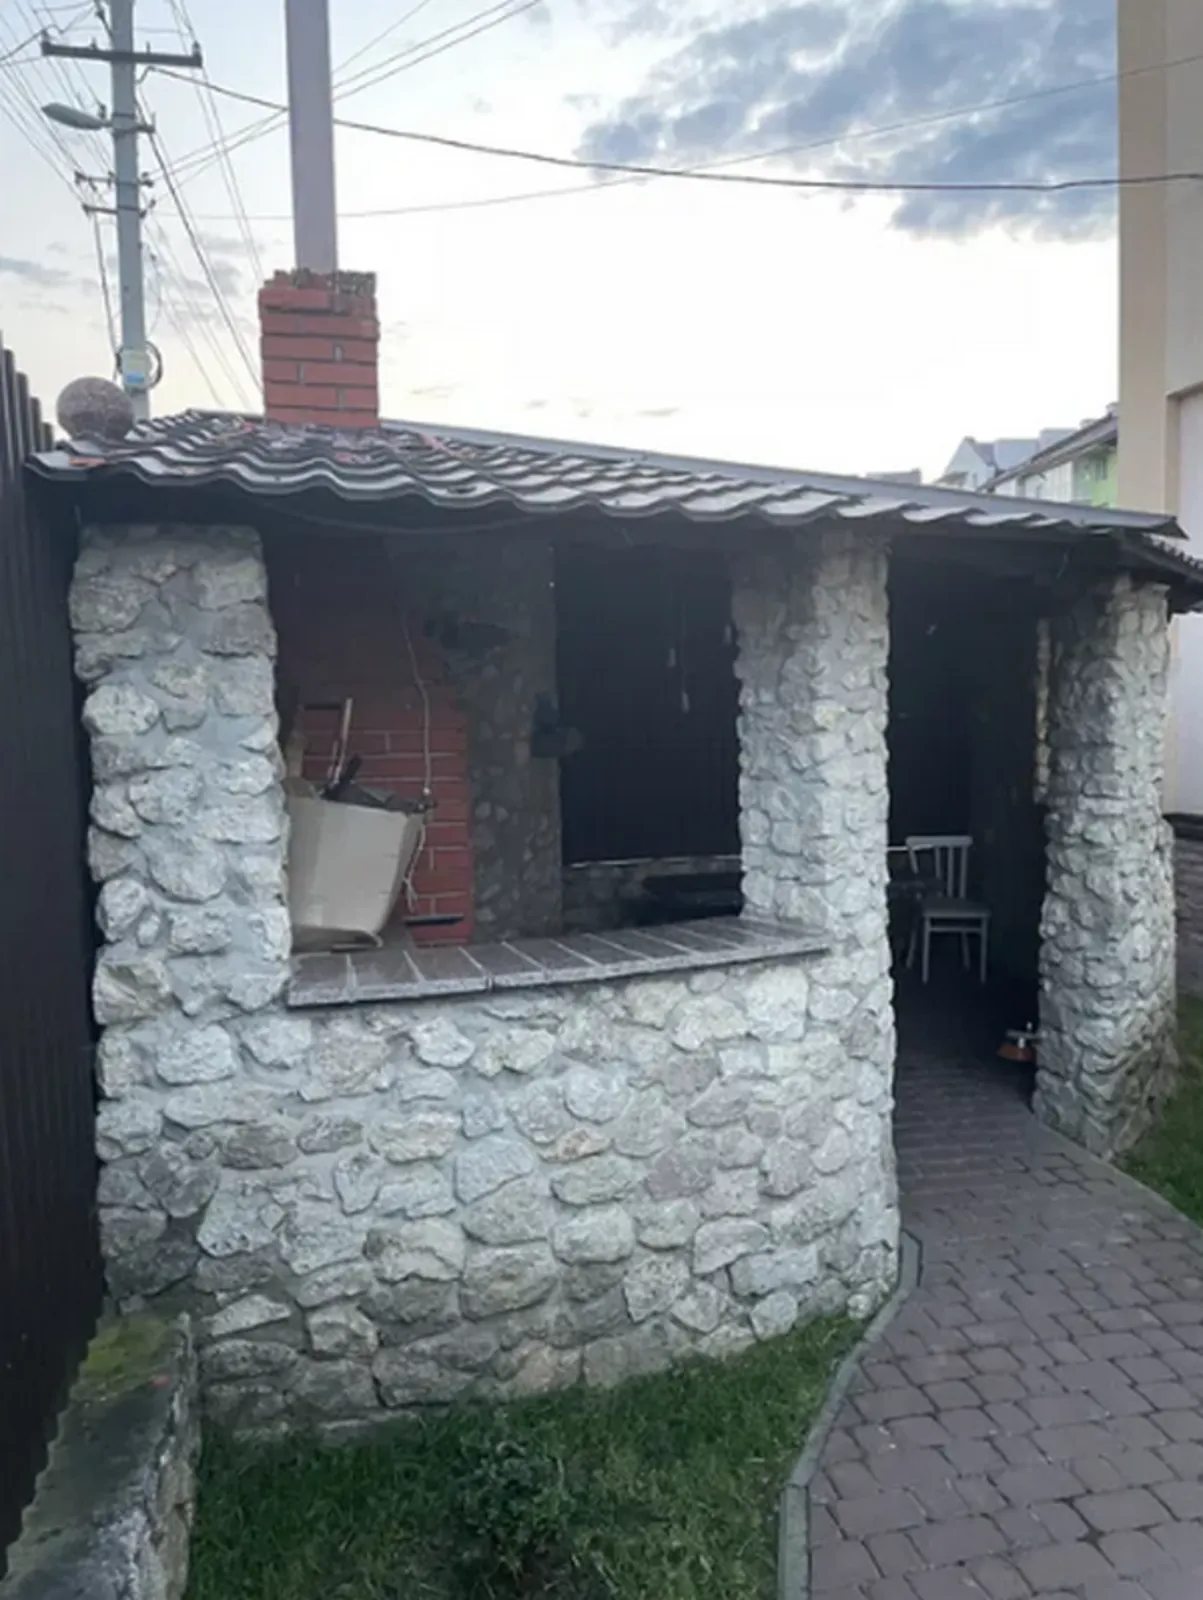 House for sale. 155 m², 1 floor. Petrykov. 